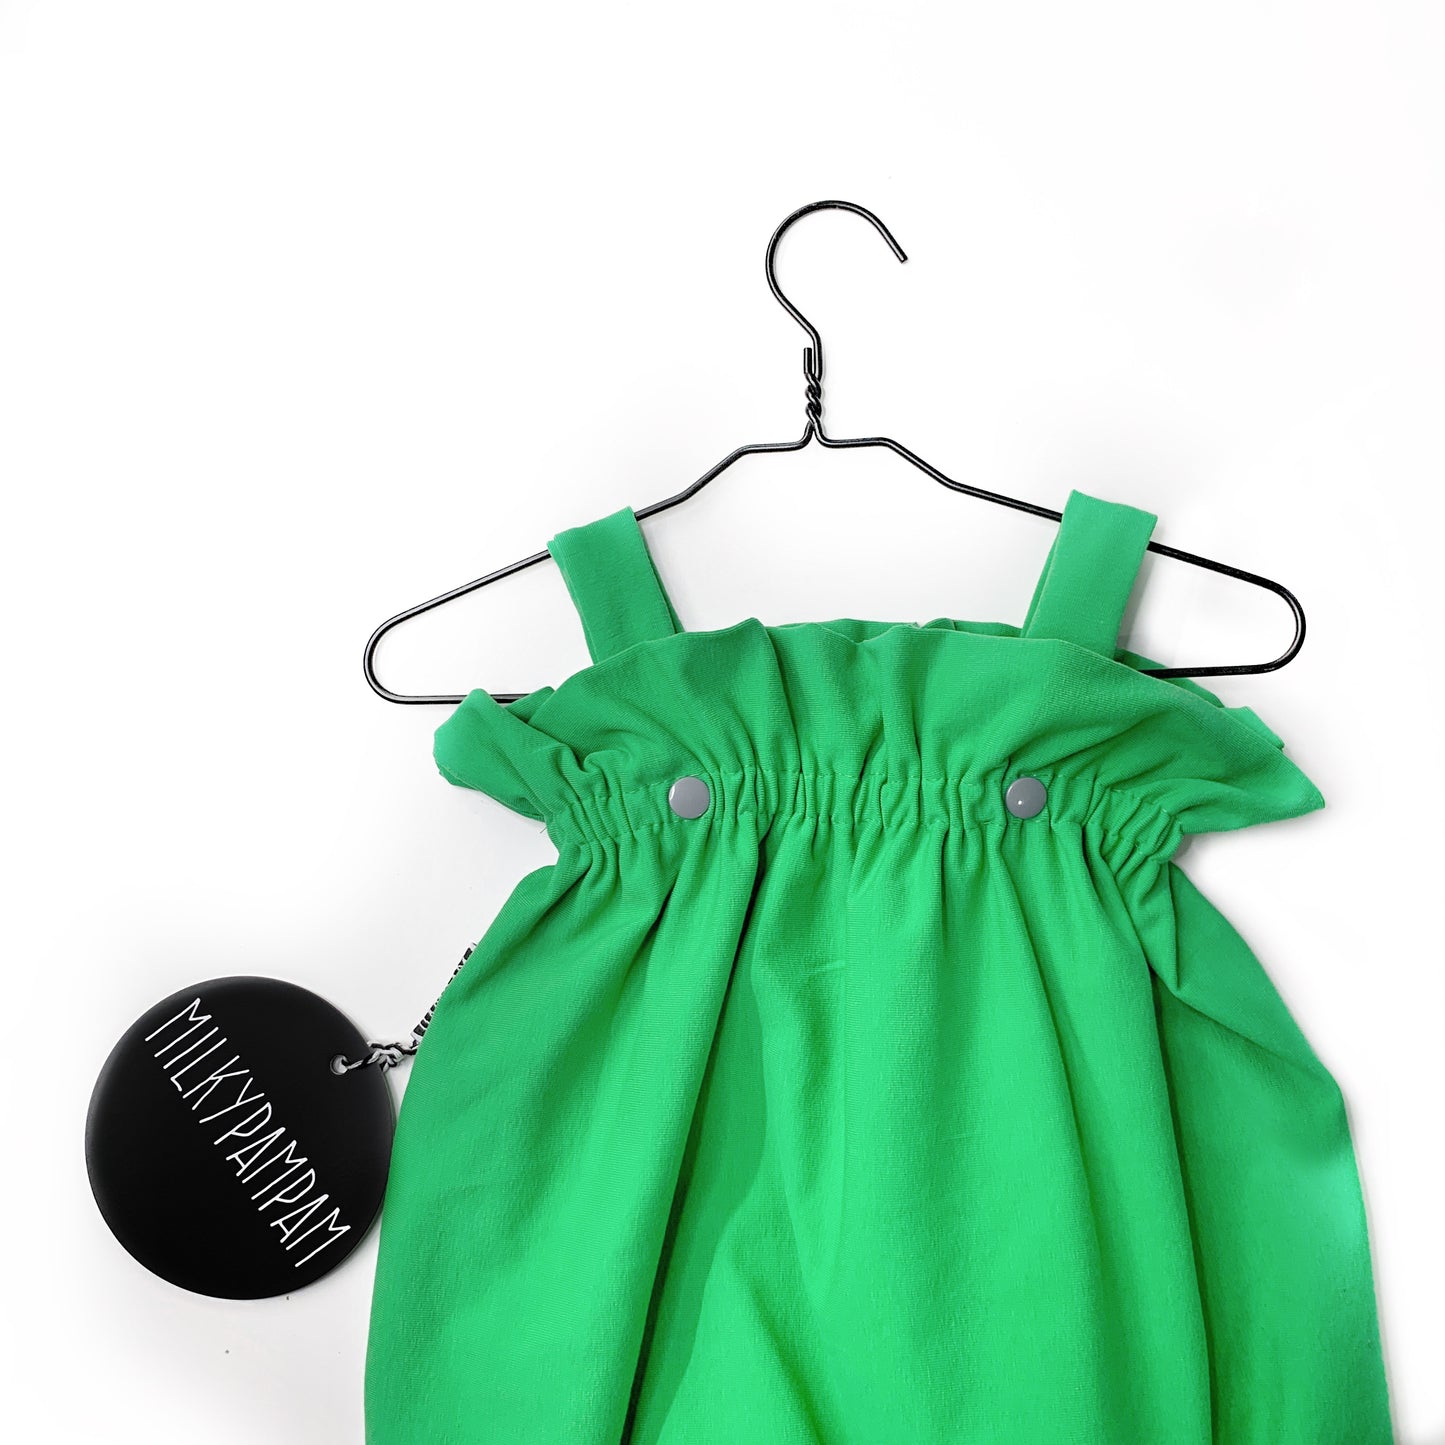 Play Suit Poison Green